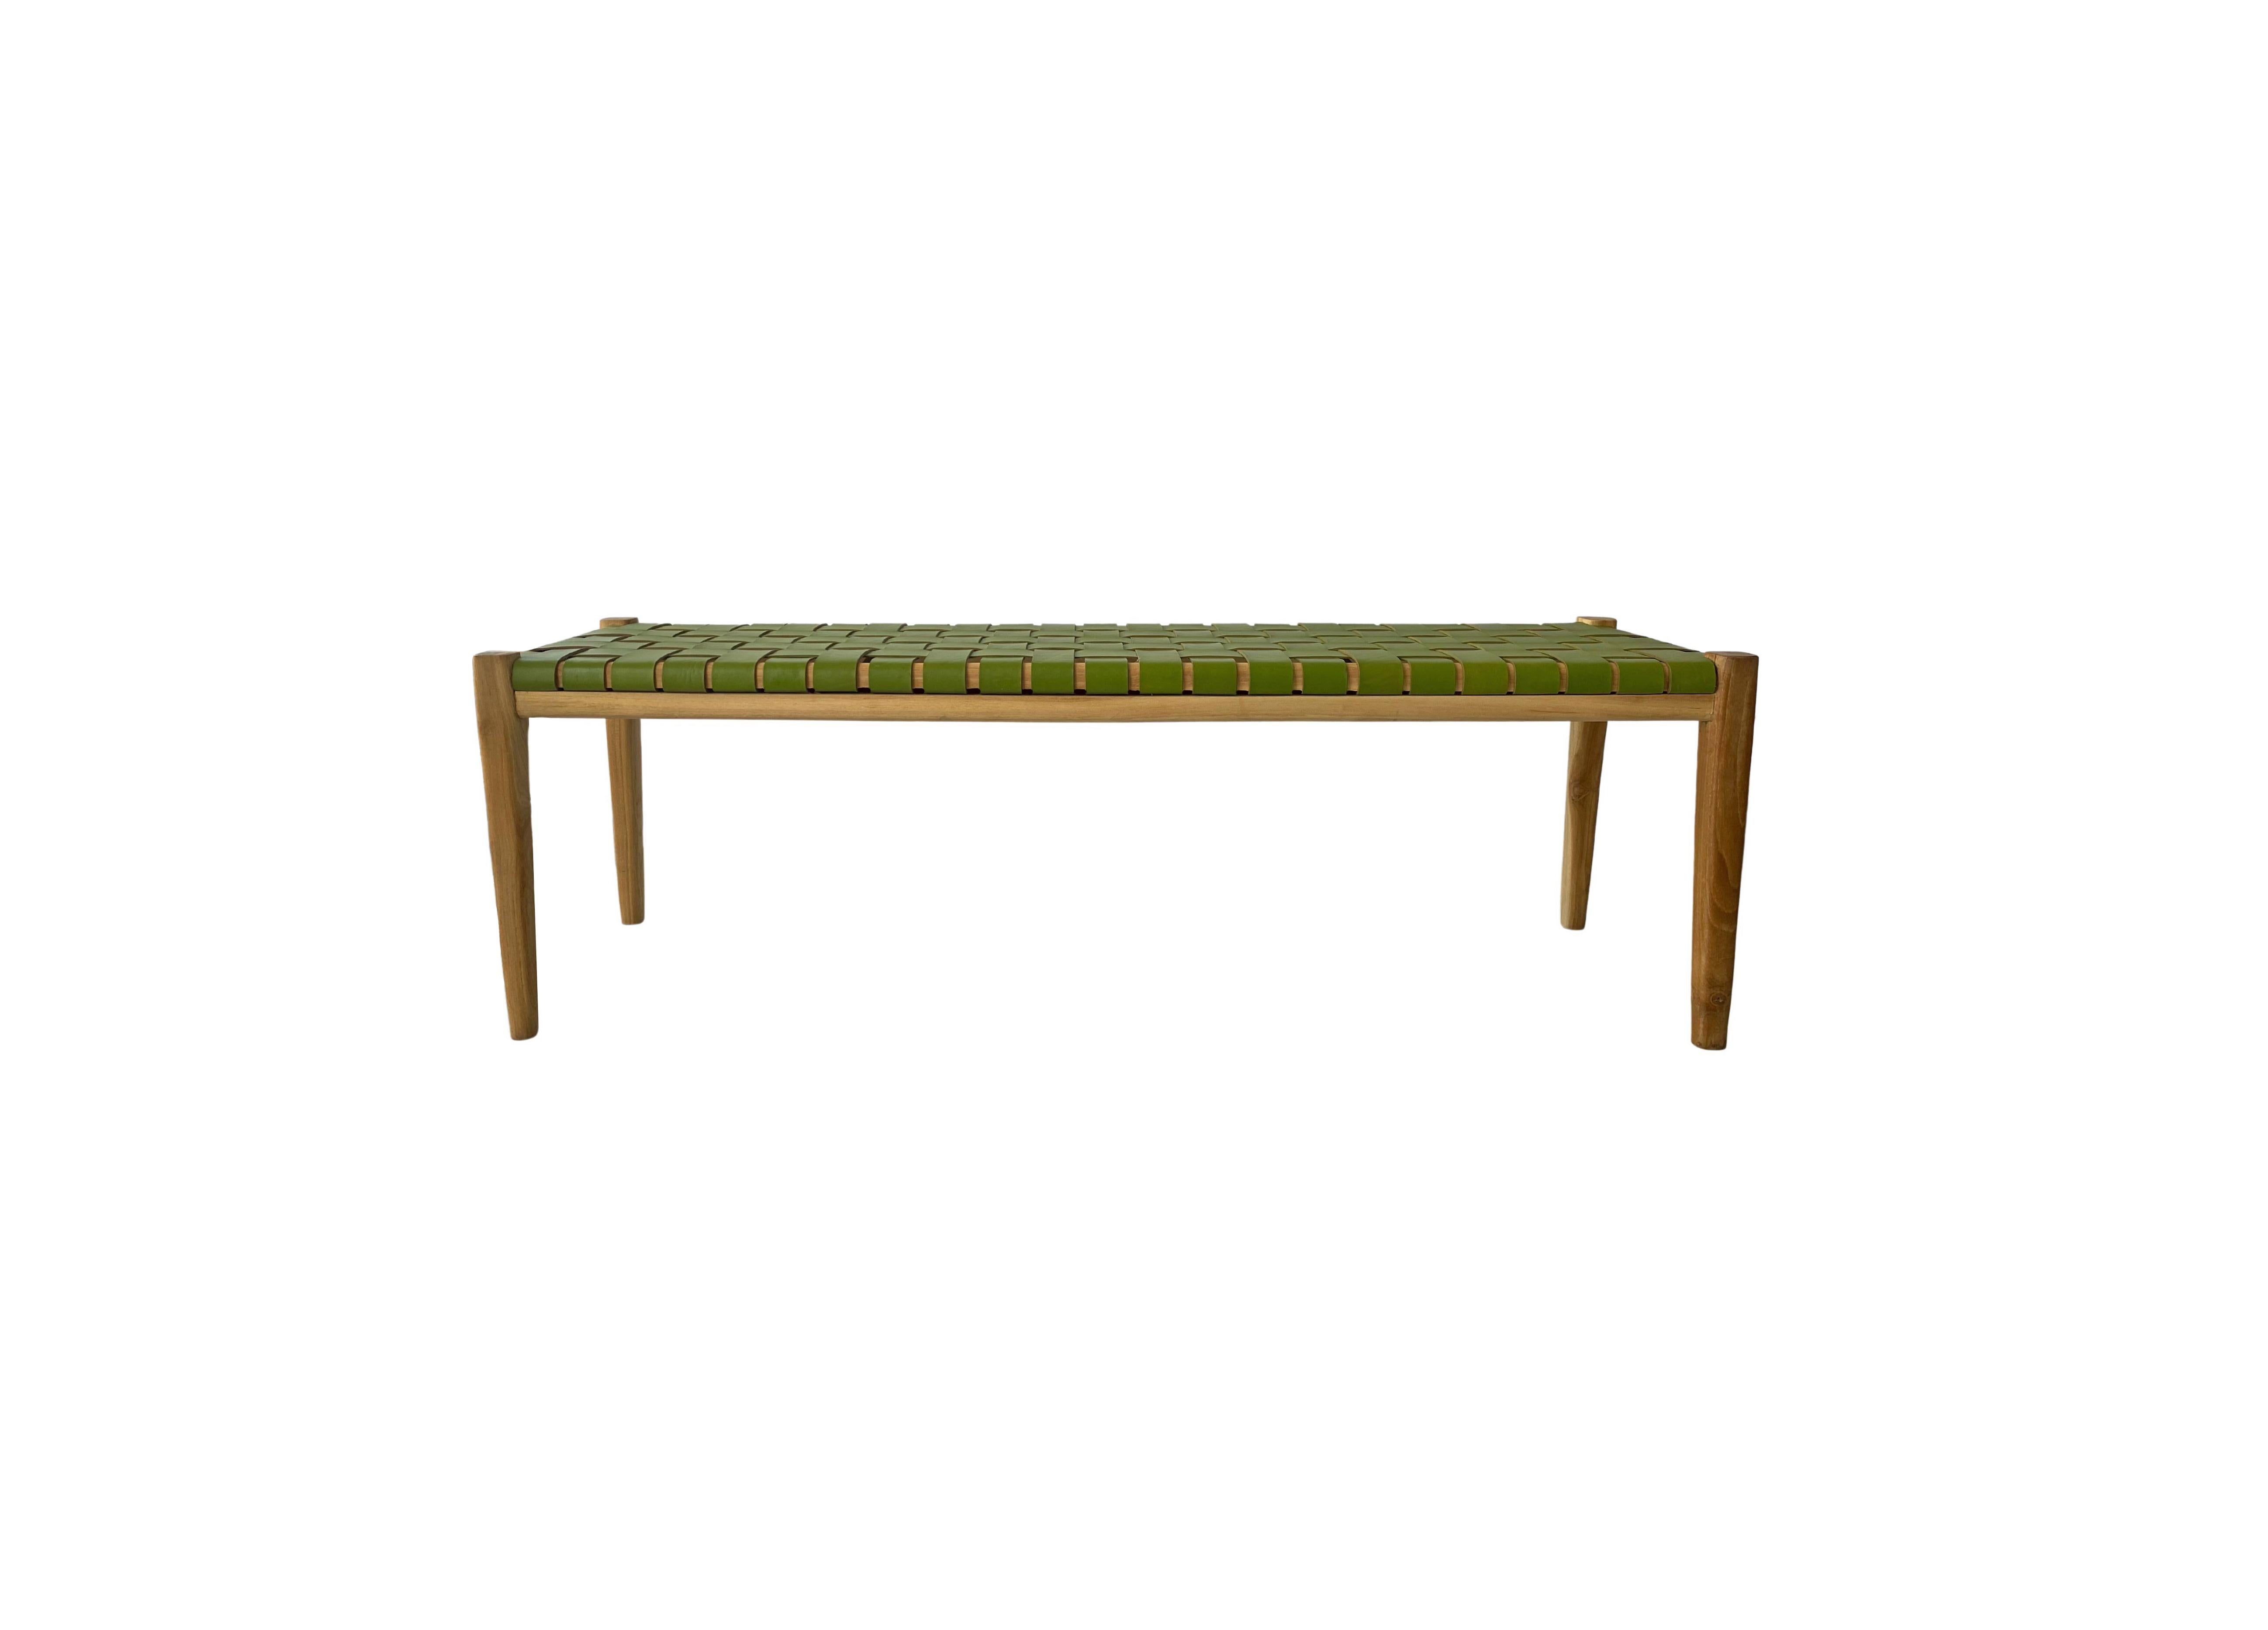 A hand-crafted teak framed & woven leather strap bench. These benches are crafted by local artisans using a wood joinery technique without the use of nails. They feature a subtle wood texture and are robust and sturdy.